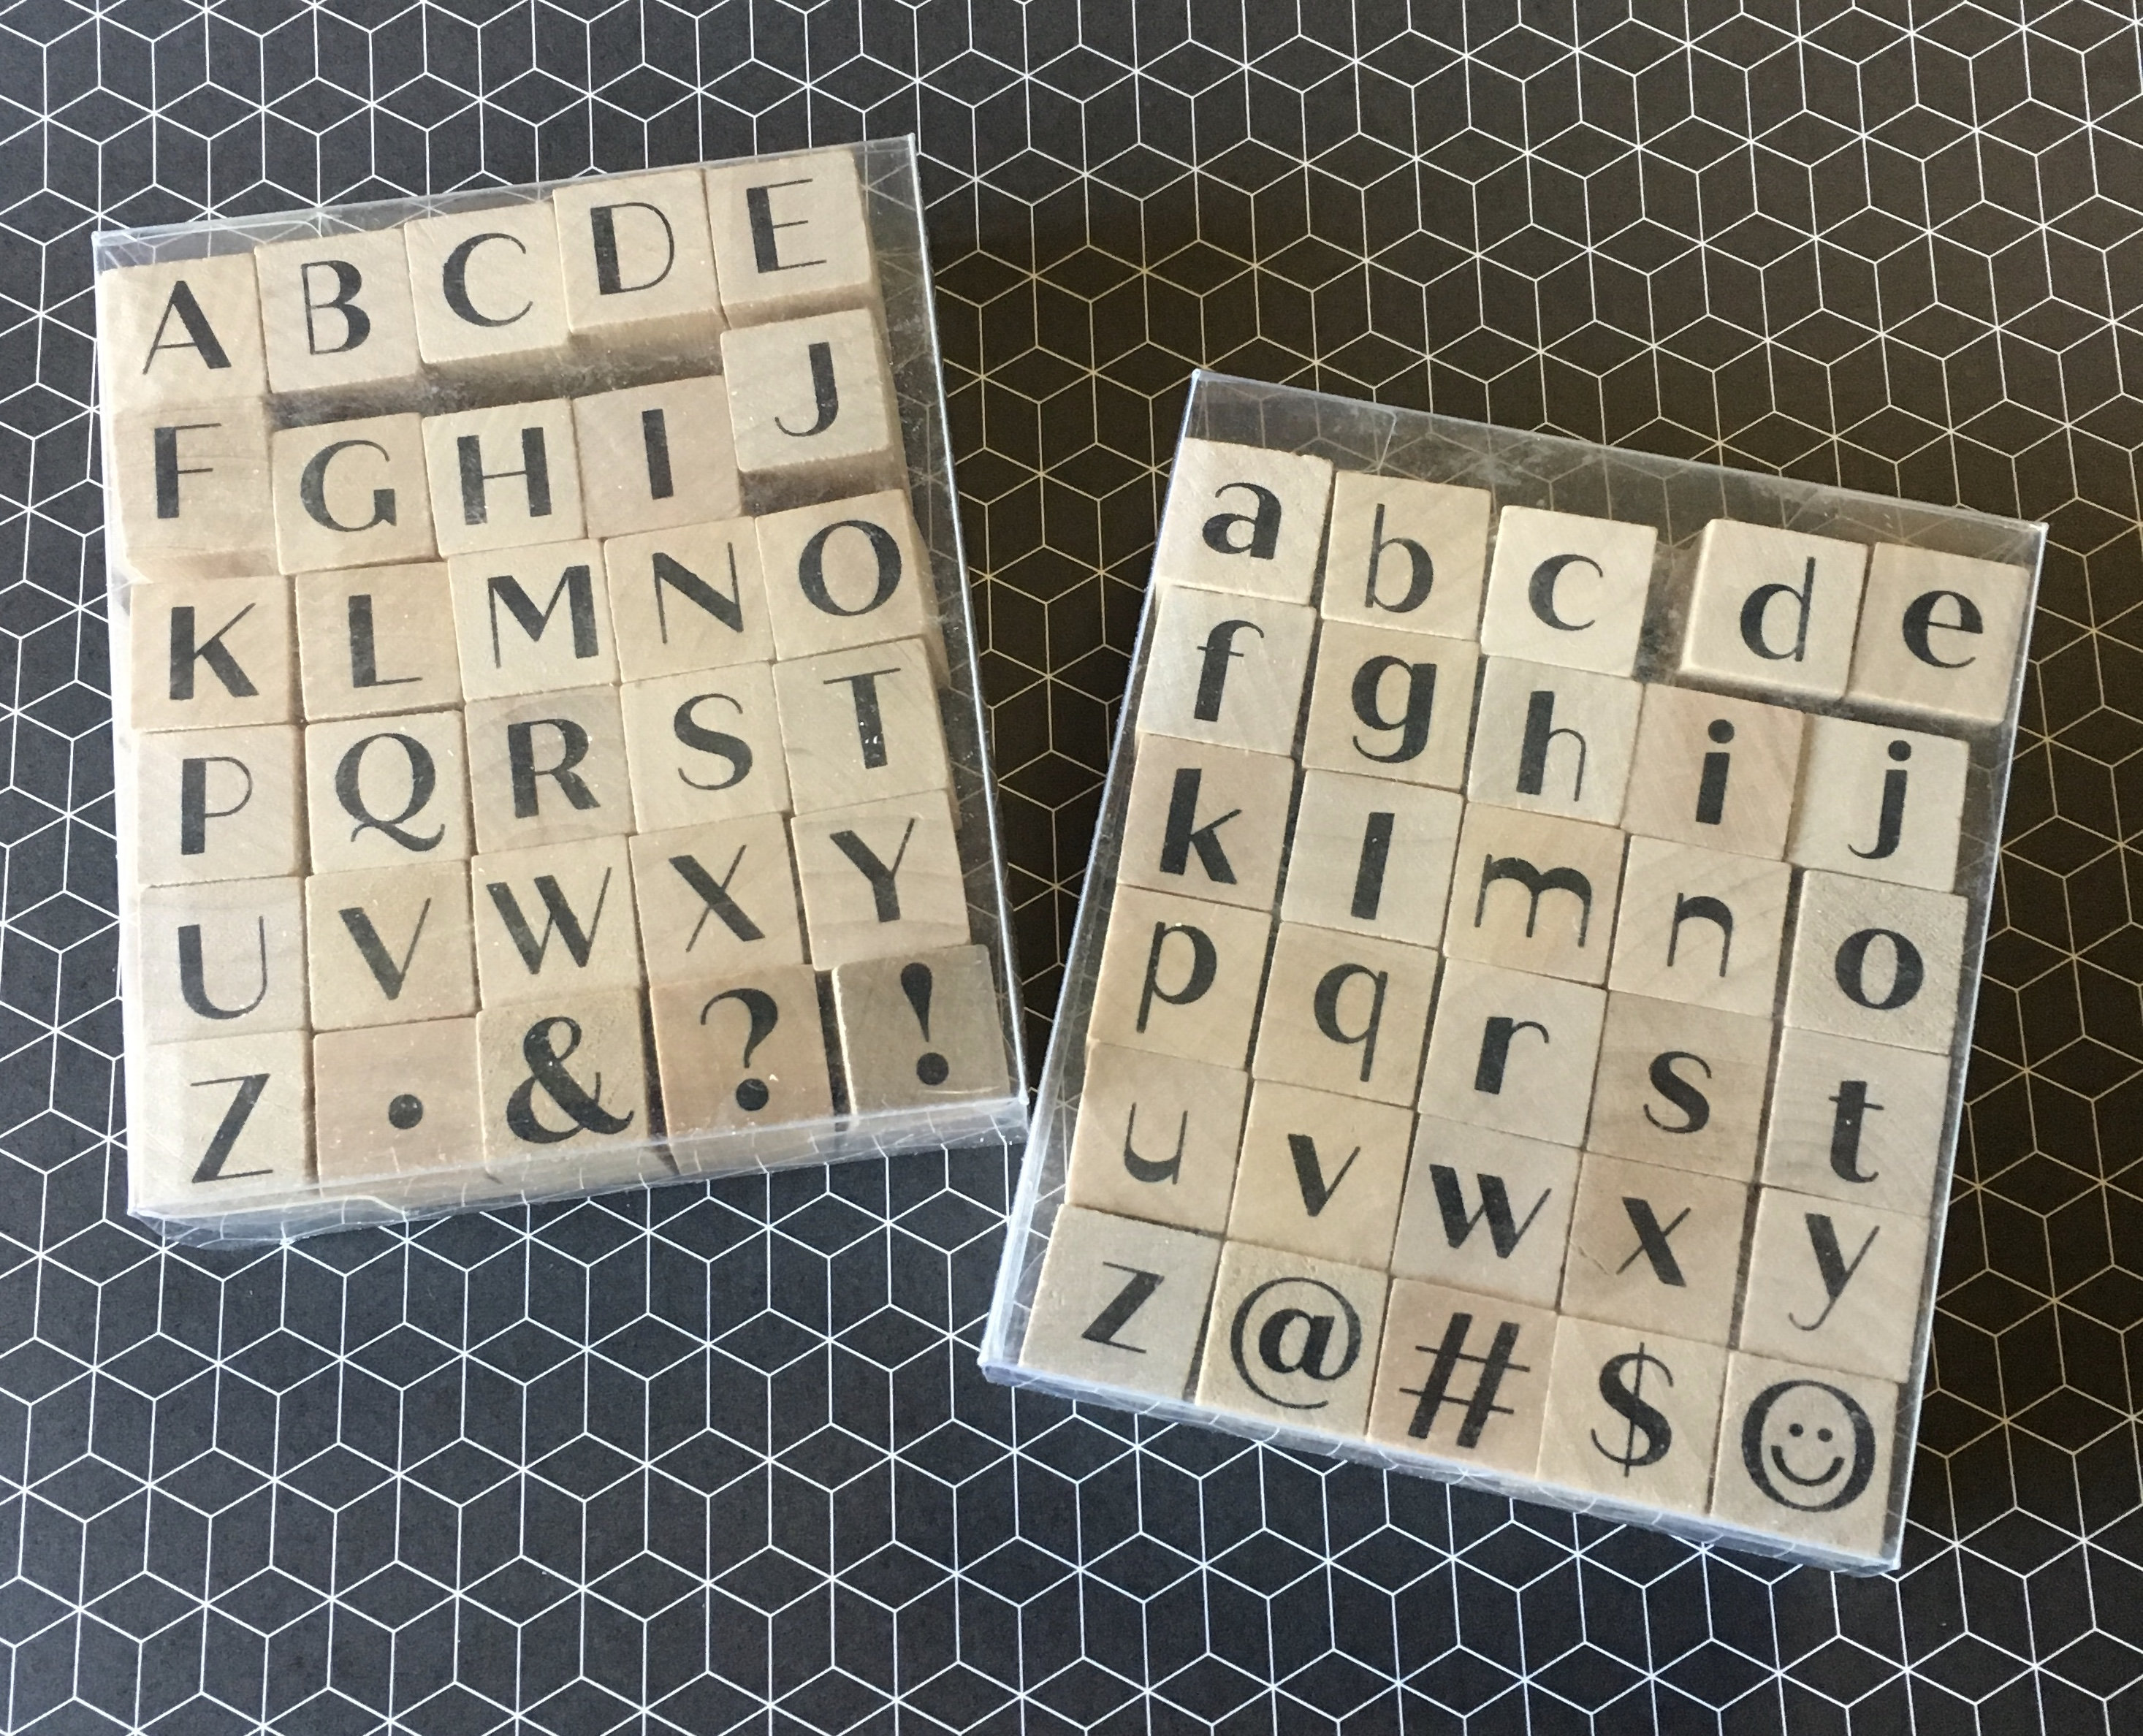 UCEC 70pcs Wooden Alphabet Stamp Rubber Stamps Customized letter